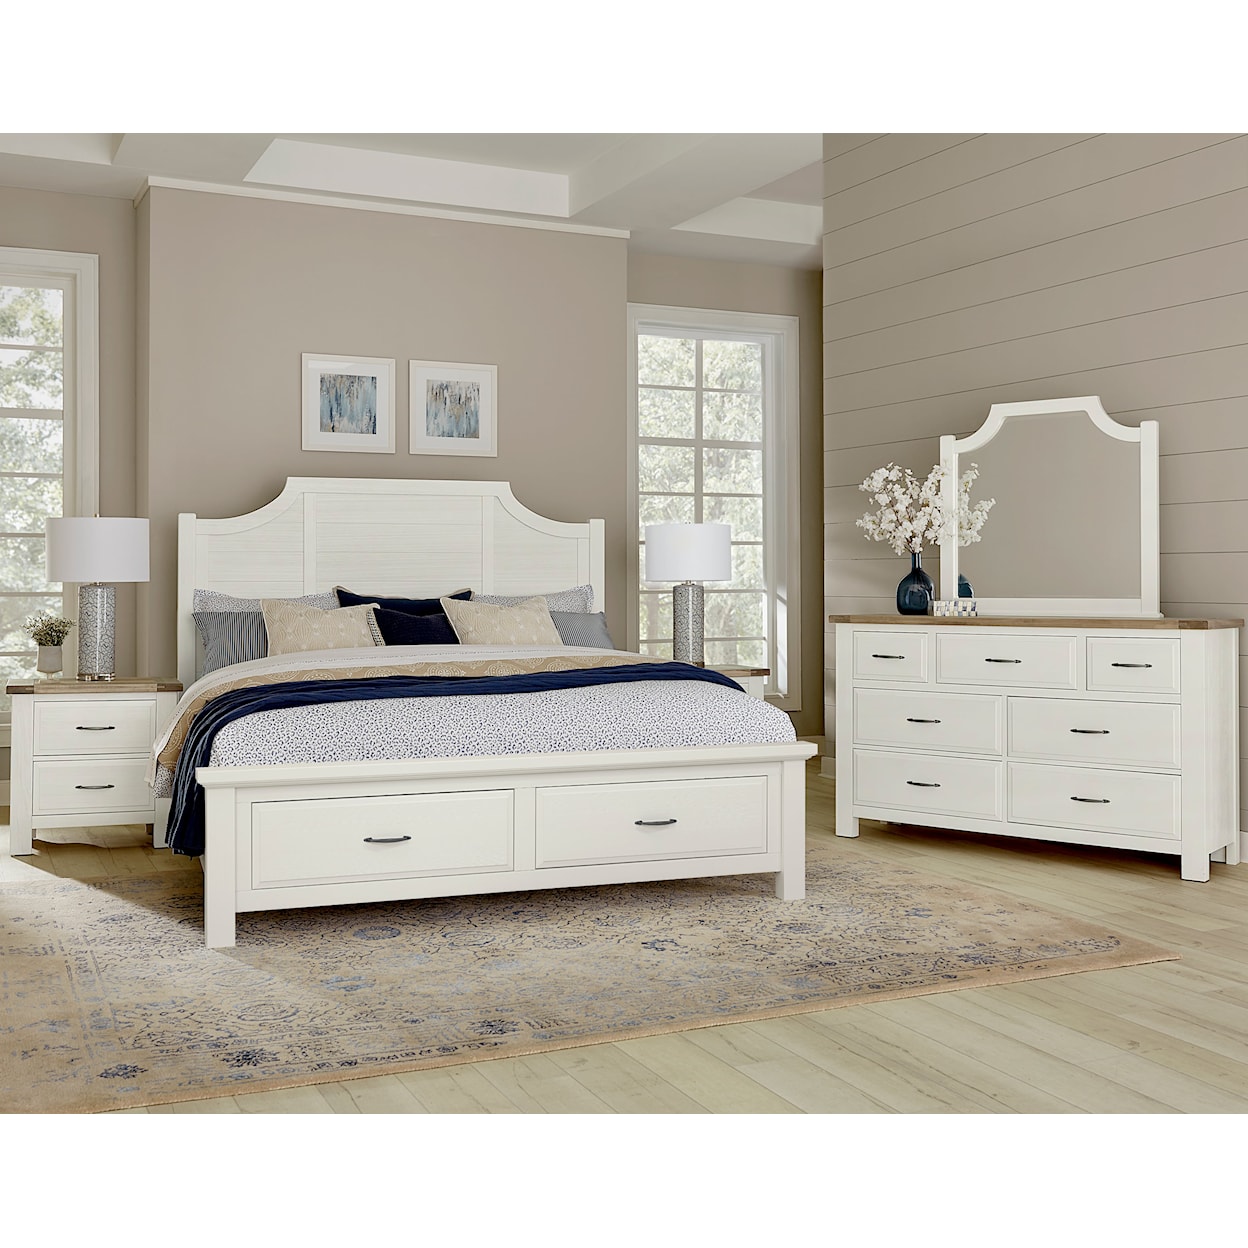 Artisan & Post Maple Road Queen Scalloped Storage Bed